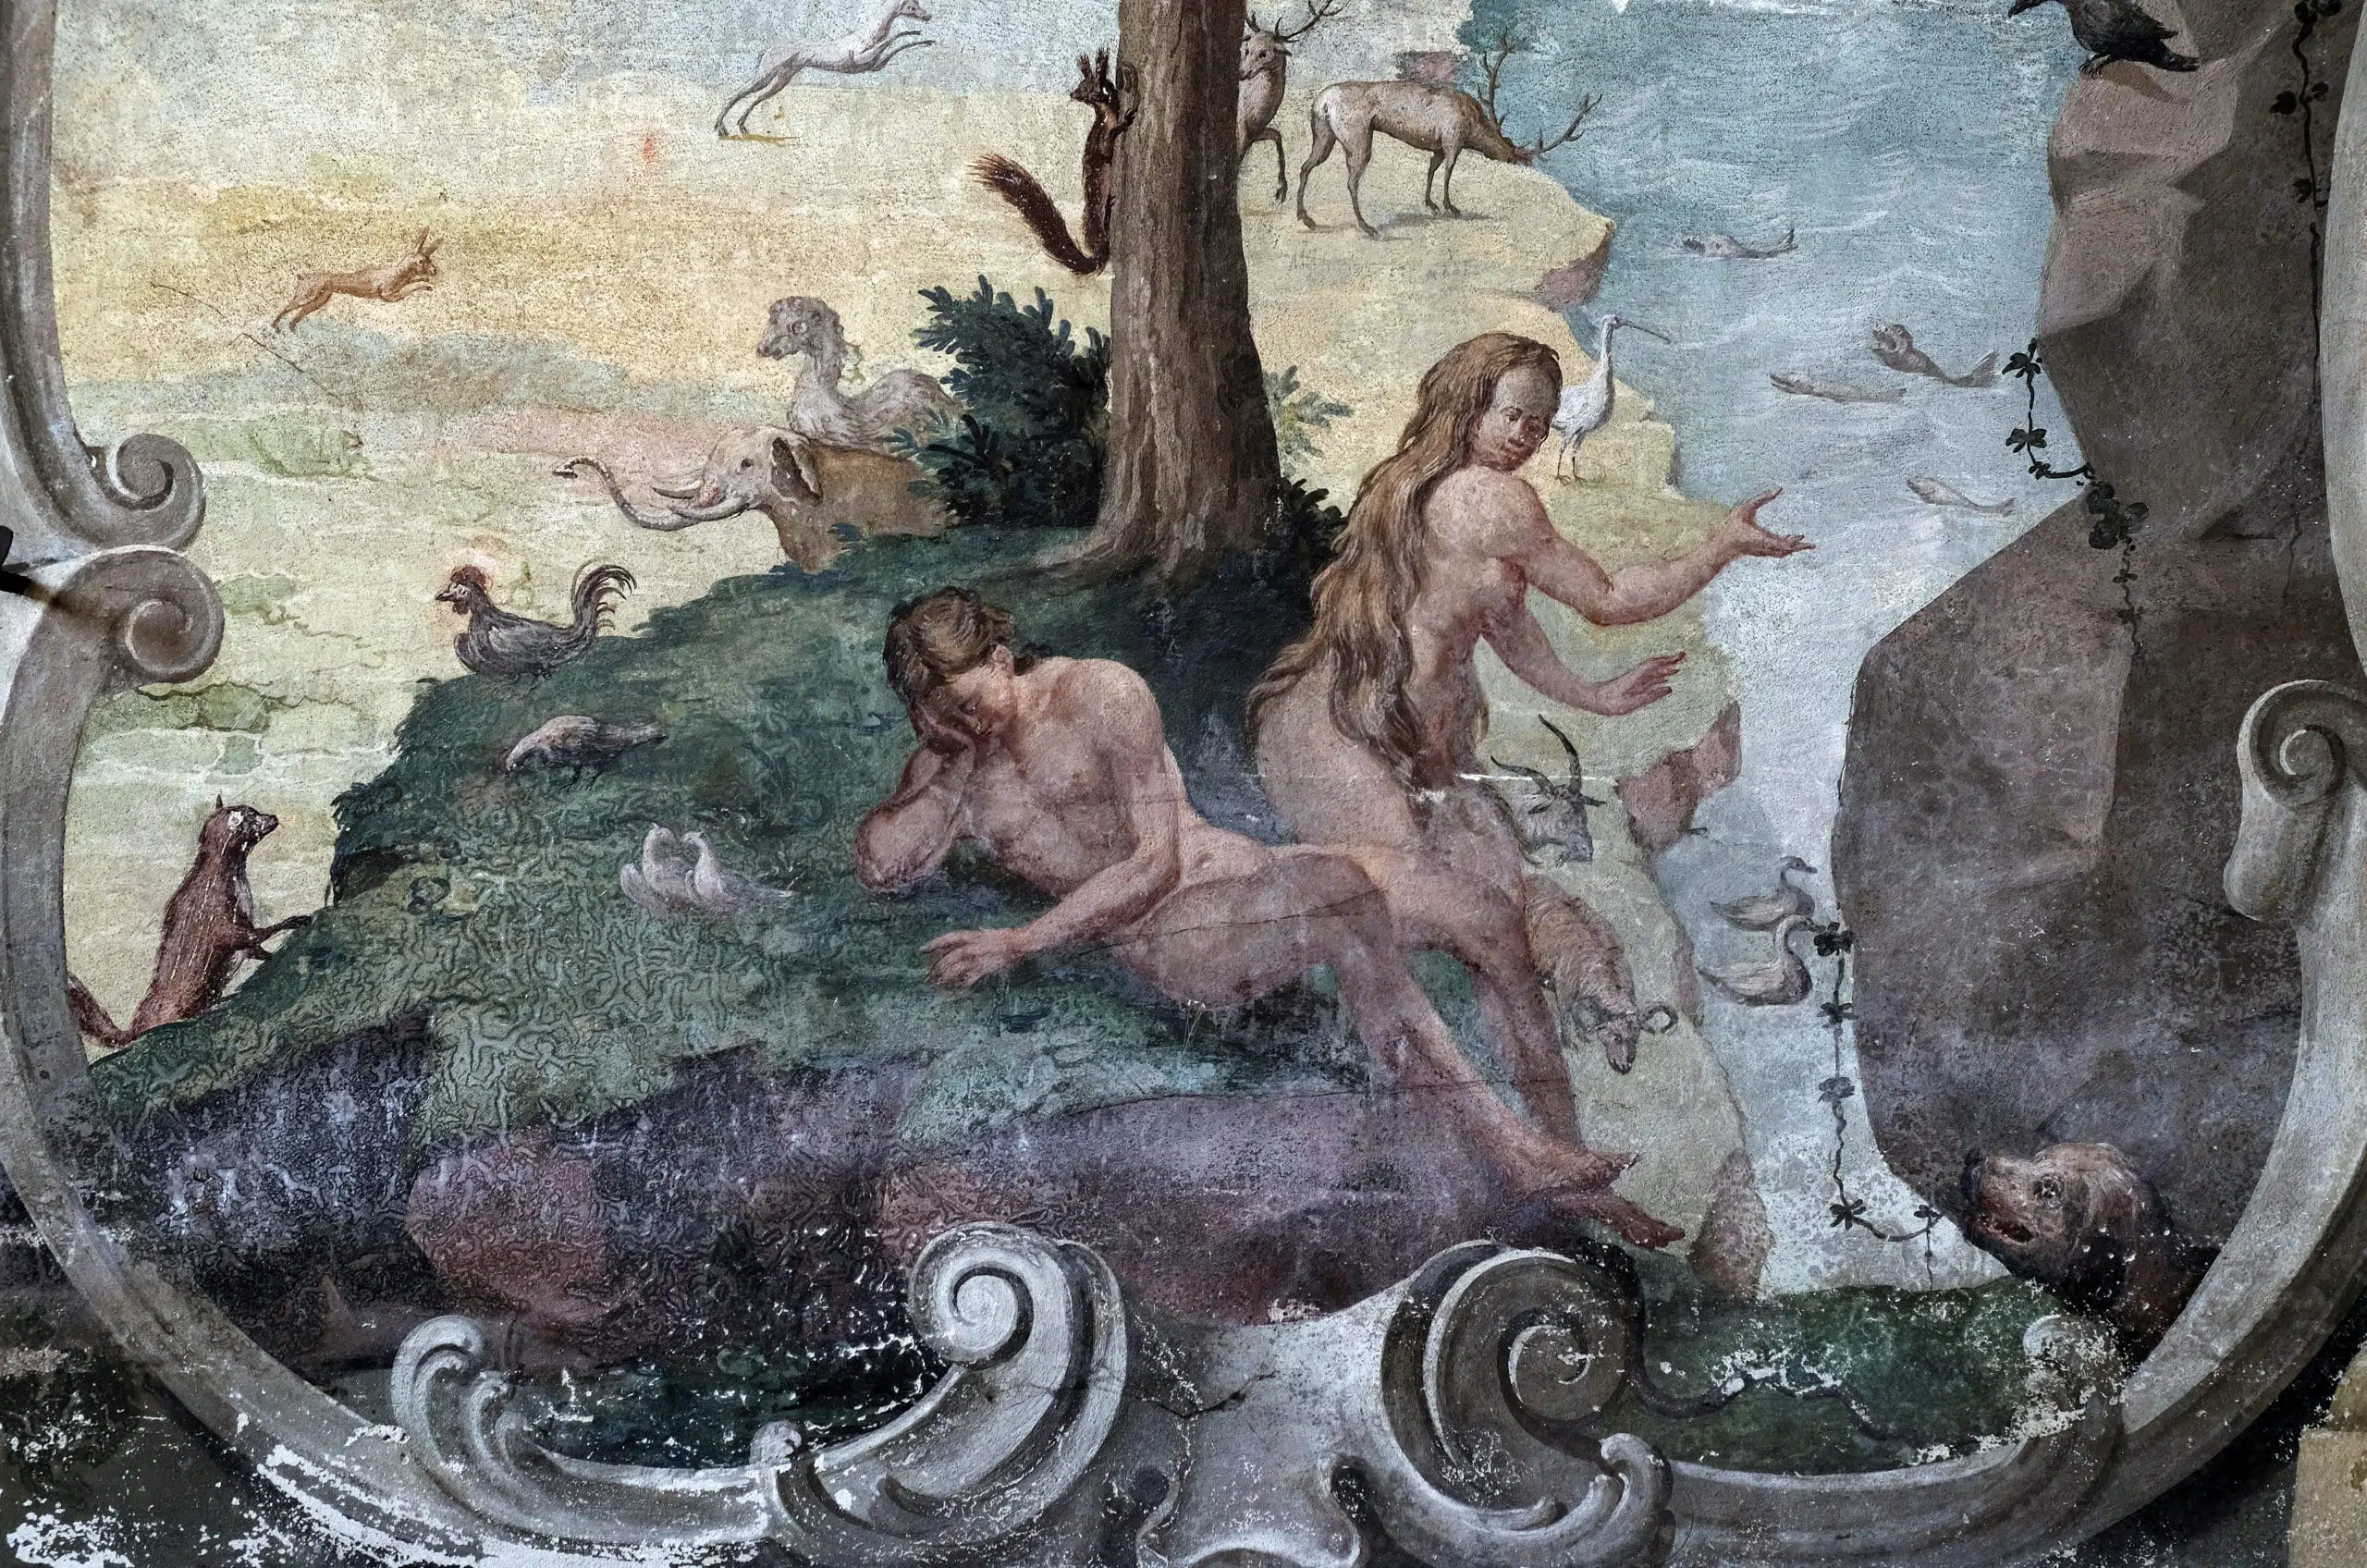 Adam and Eve in the Garden of Eden, fresco on the ceiling of the Saint John the Baptist church in Zagreb, Croatia